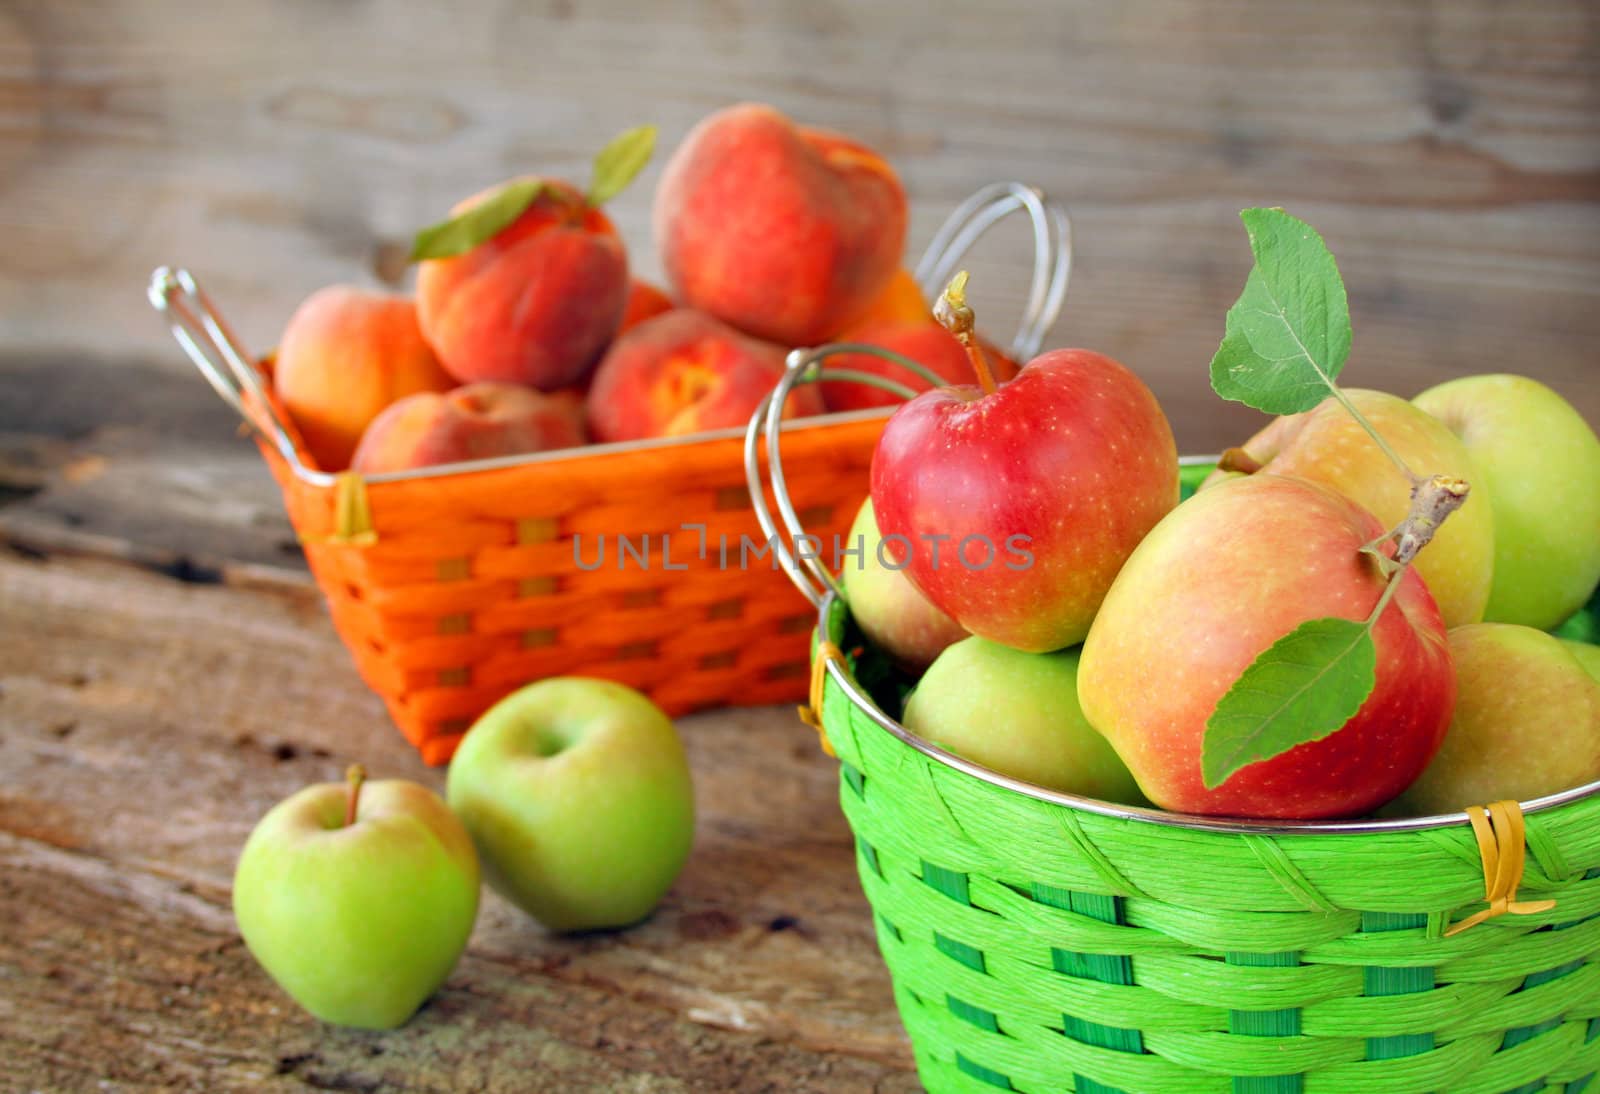 A basket of apples and a basket of peaches with a rustic surrounding.  Focus is on the basket of apples.